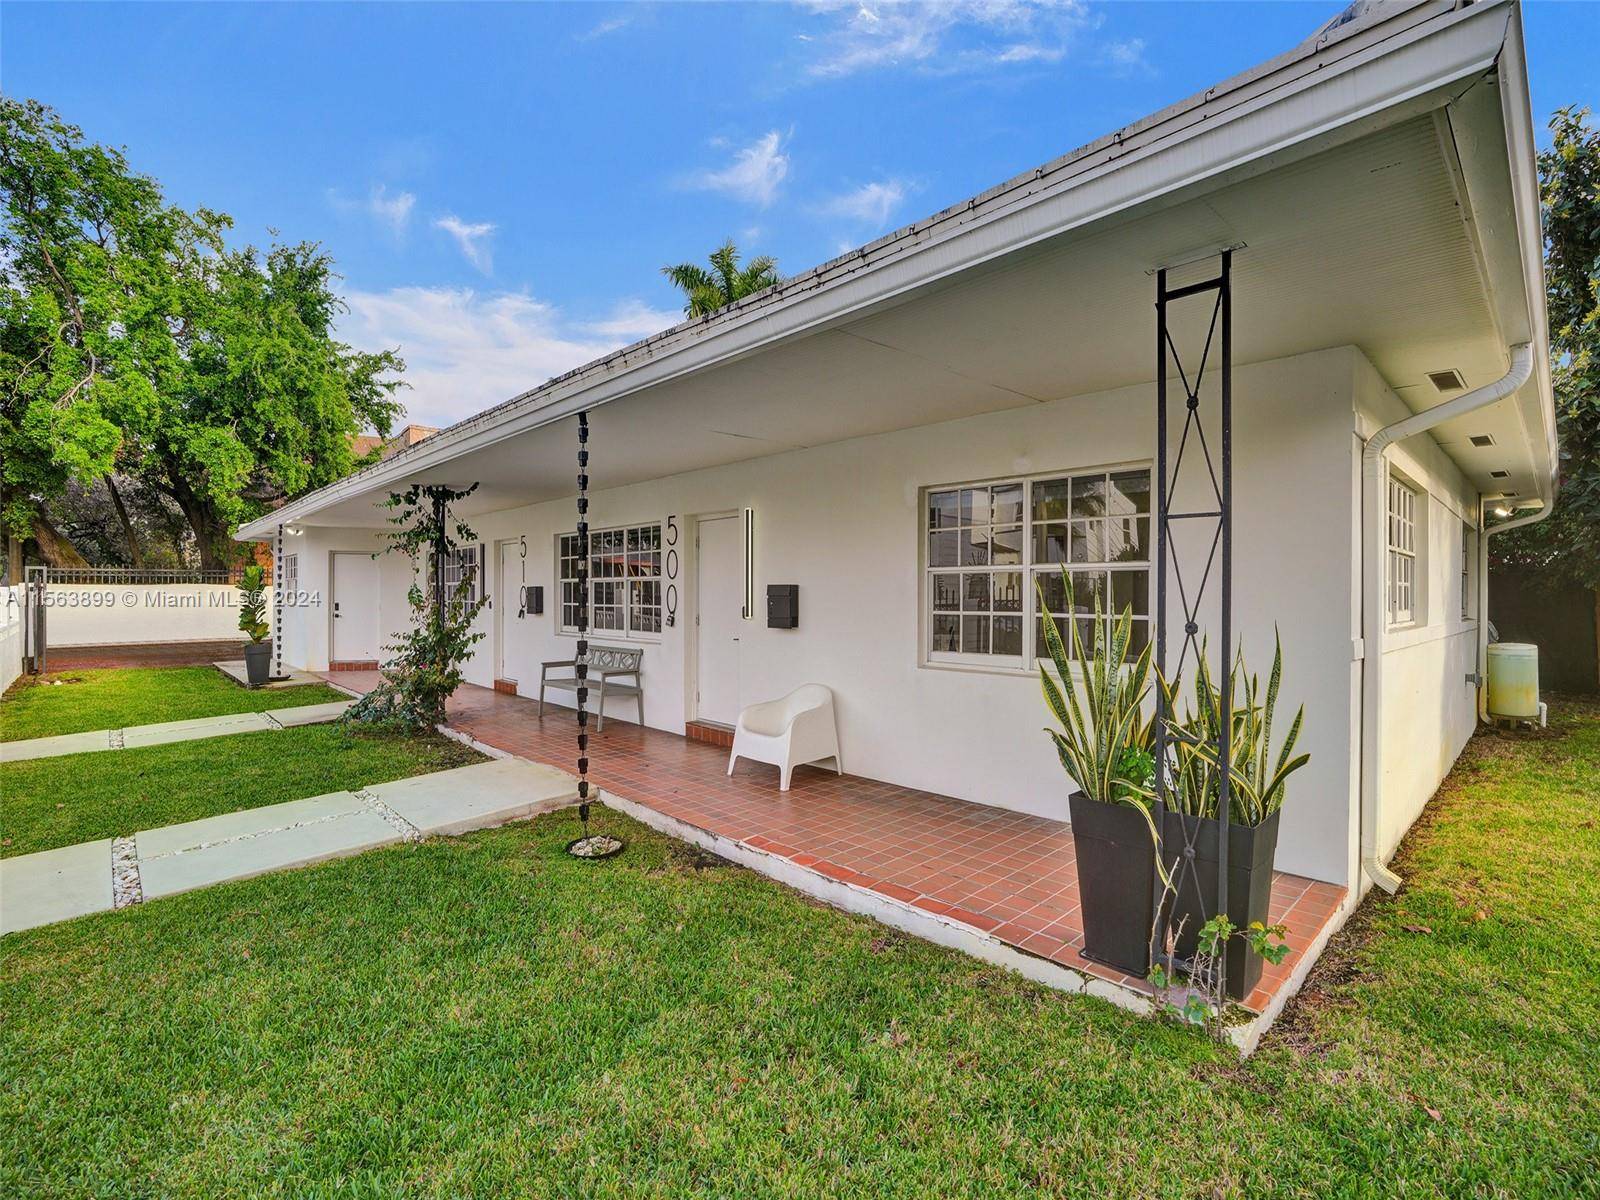 Welcome to your charming oasis in the heart of Miami's historic Palm Grove neighborhood !